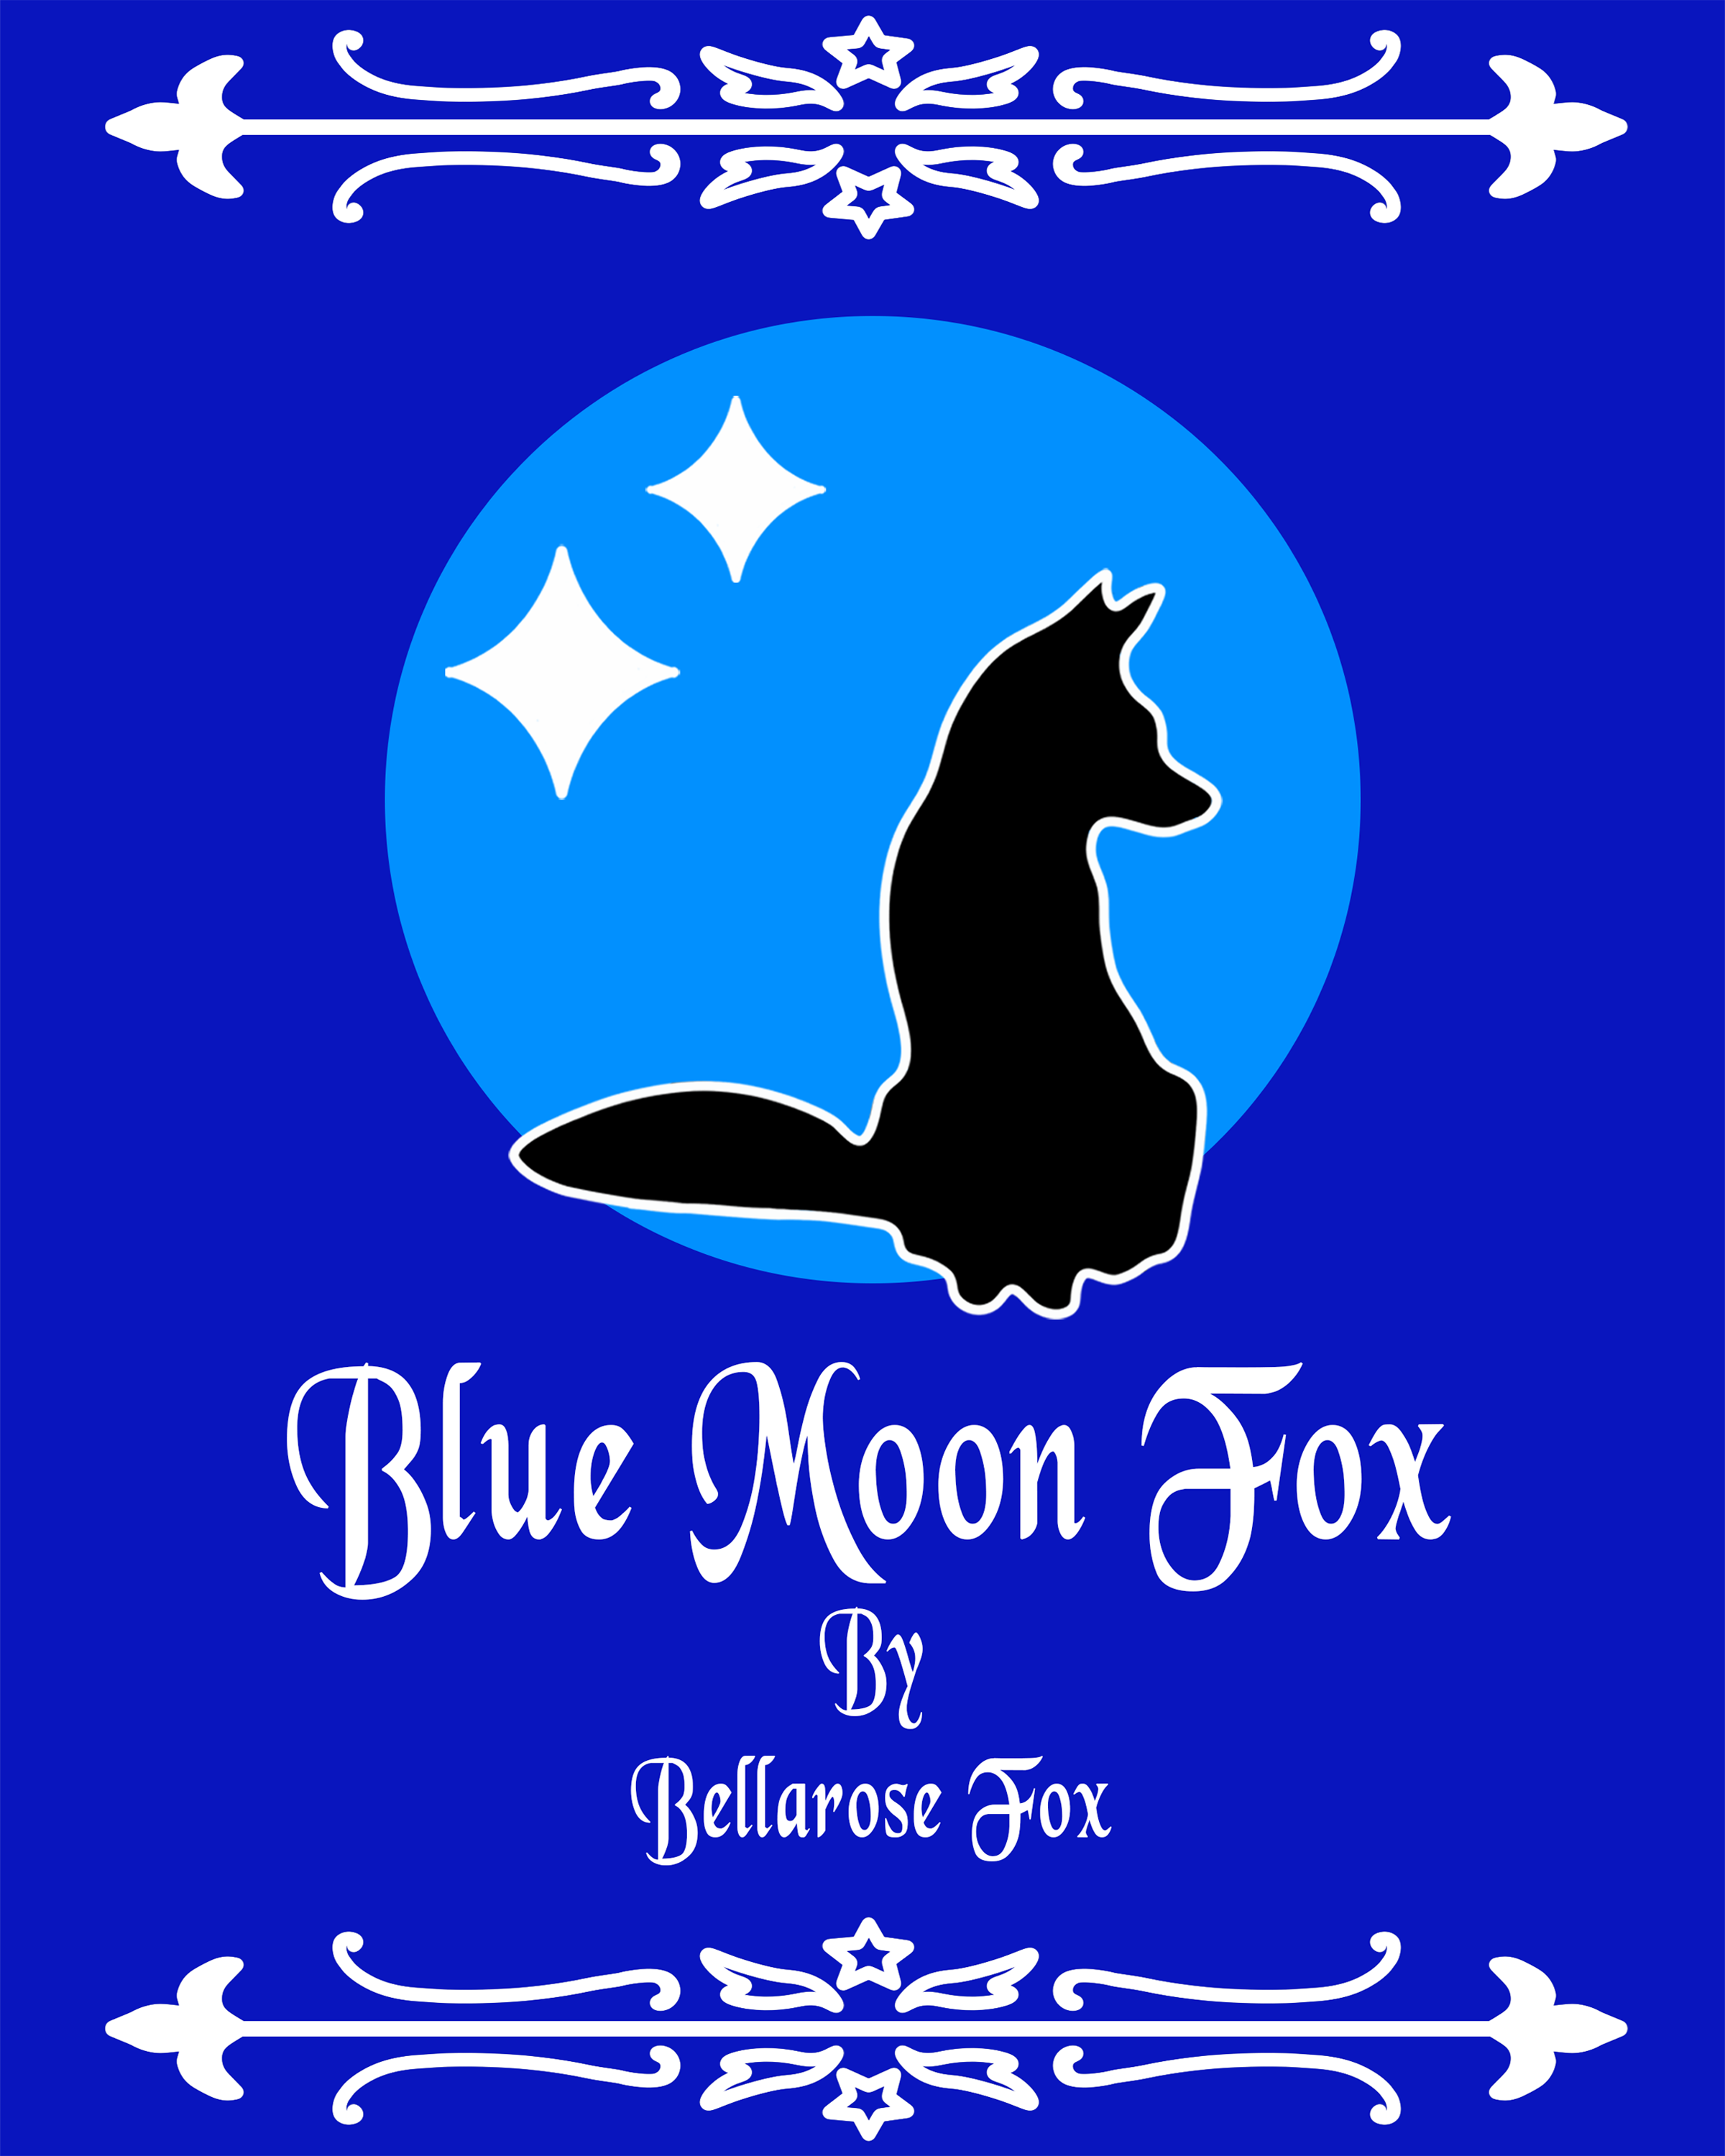 Blue moon fox book cover for electronic